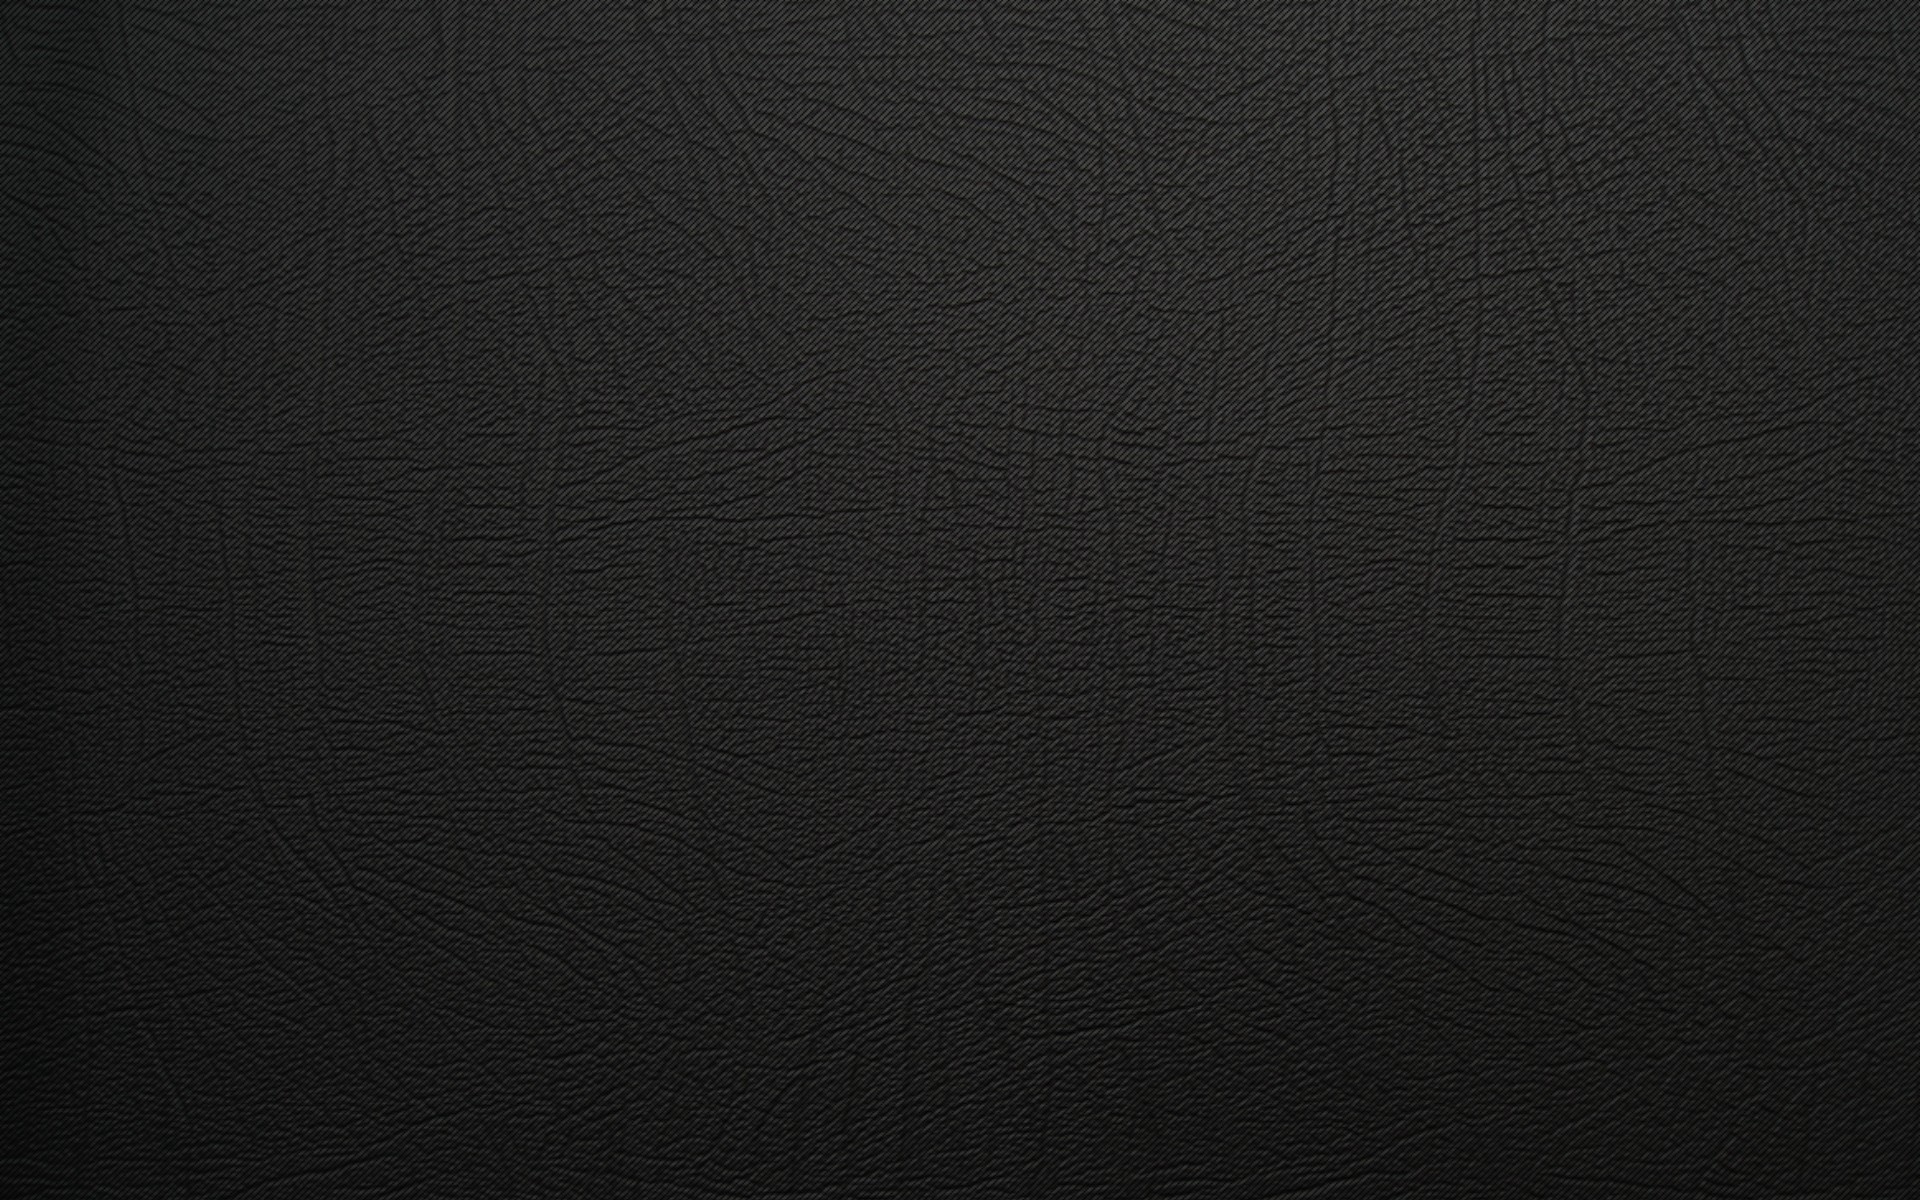 Leather Wallpaper 1920x1200 Leather